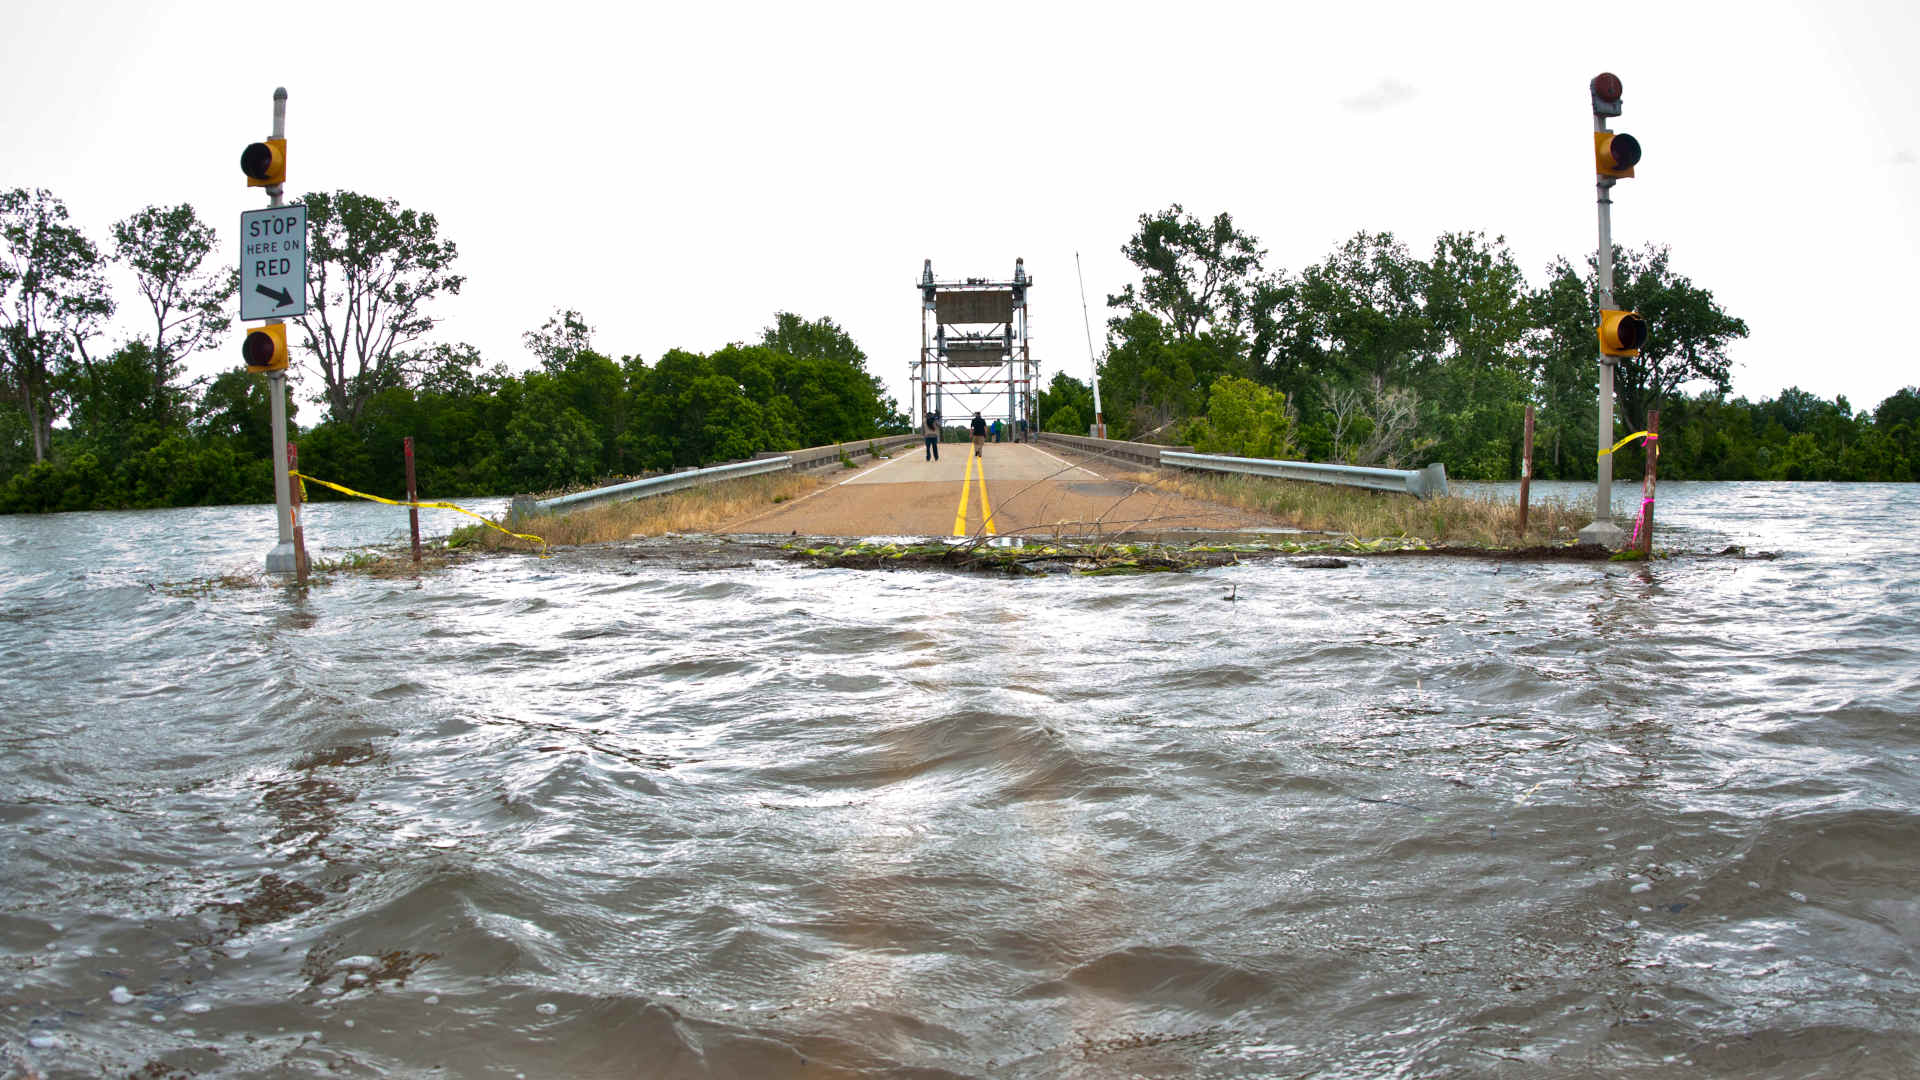 Mississippi River floodwaters pushed into the Yazoo River, flooding 4,000 acres and damaging corn crops in 2011.